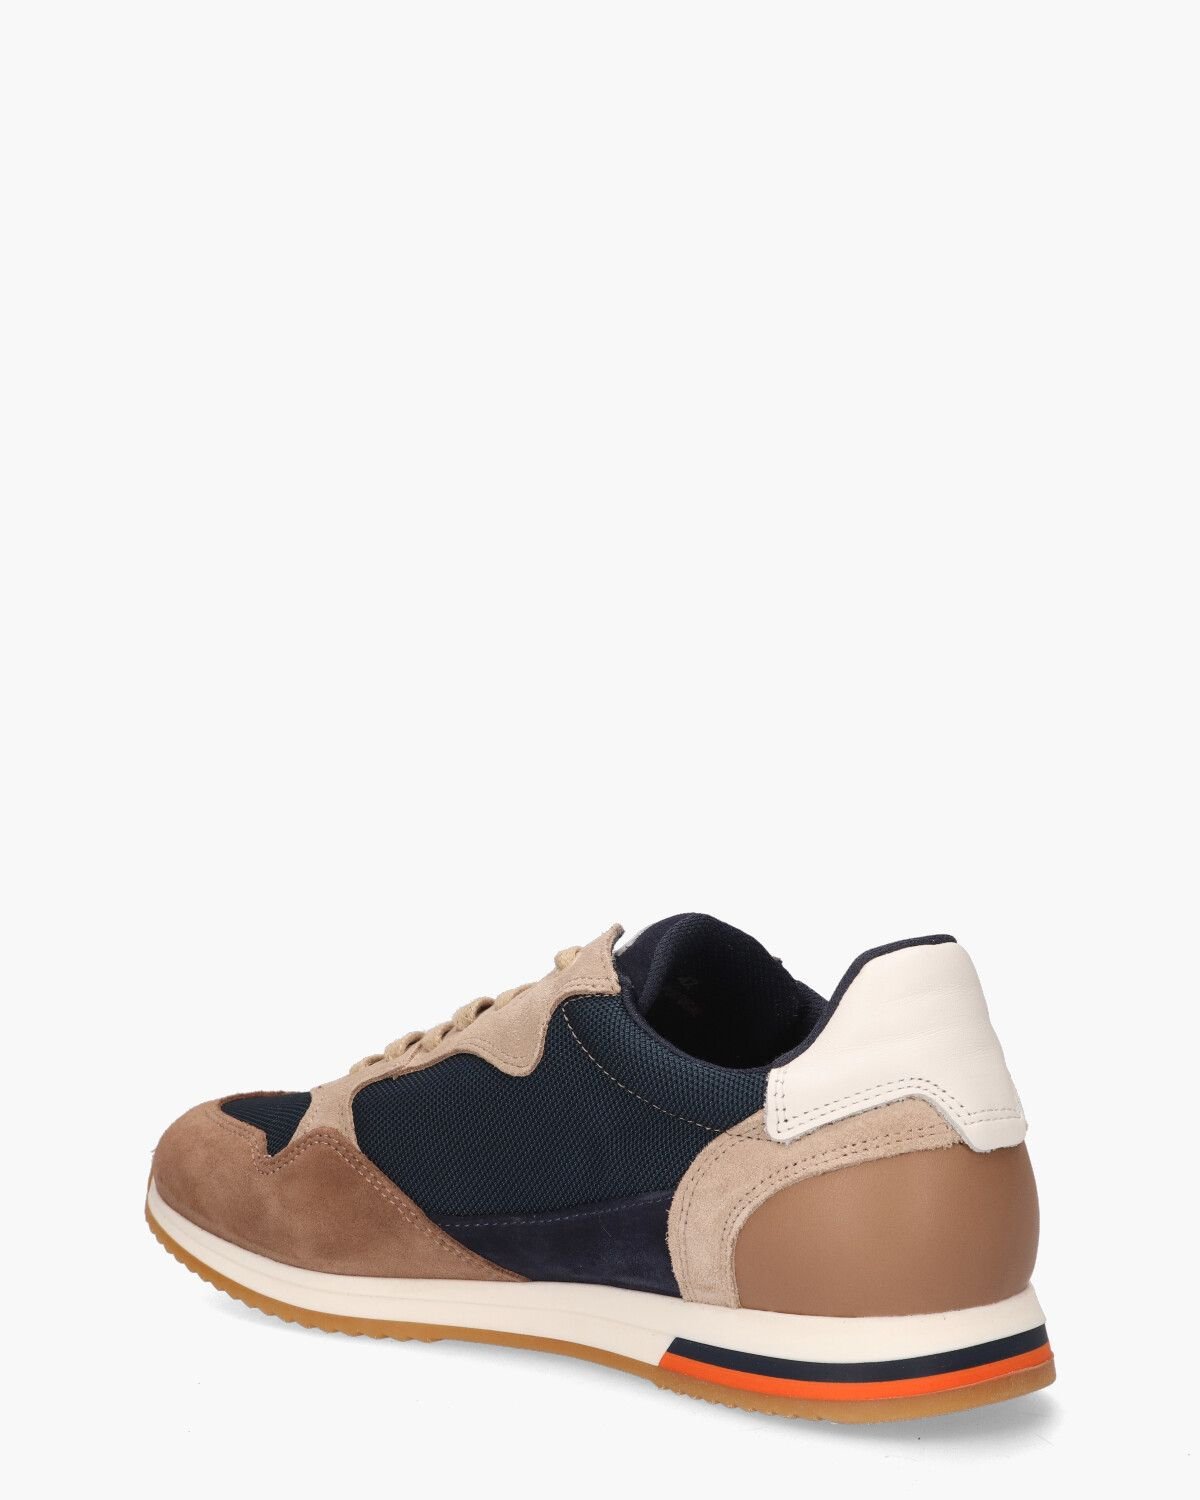 Olize Blauw/Taupe Herensneakers